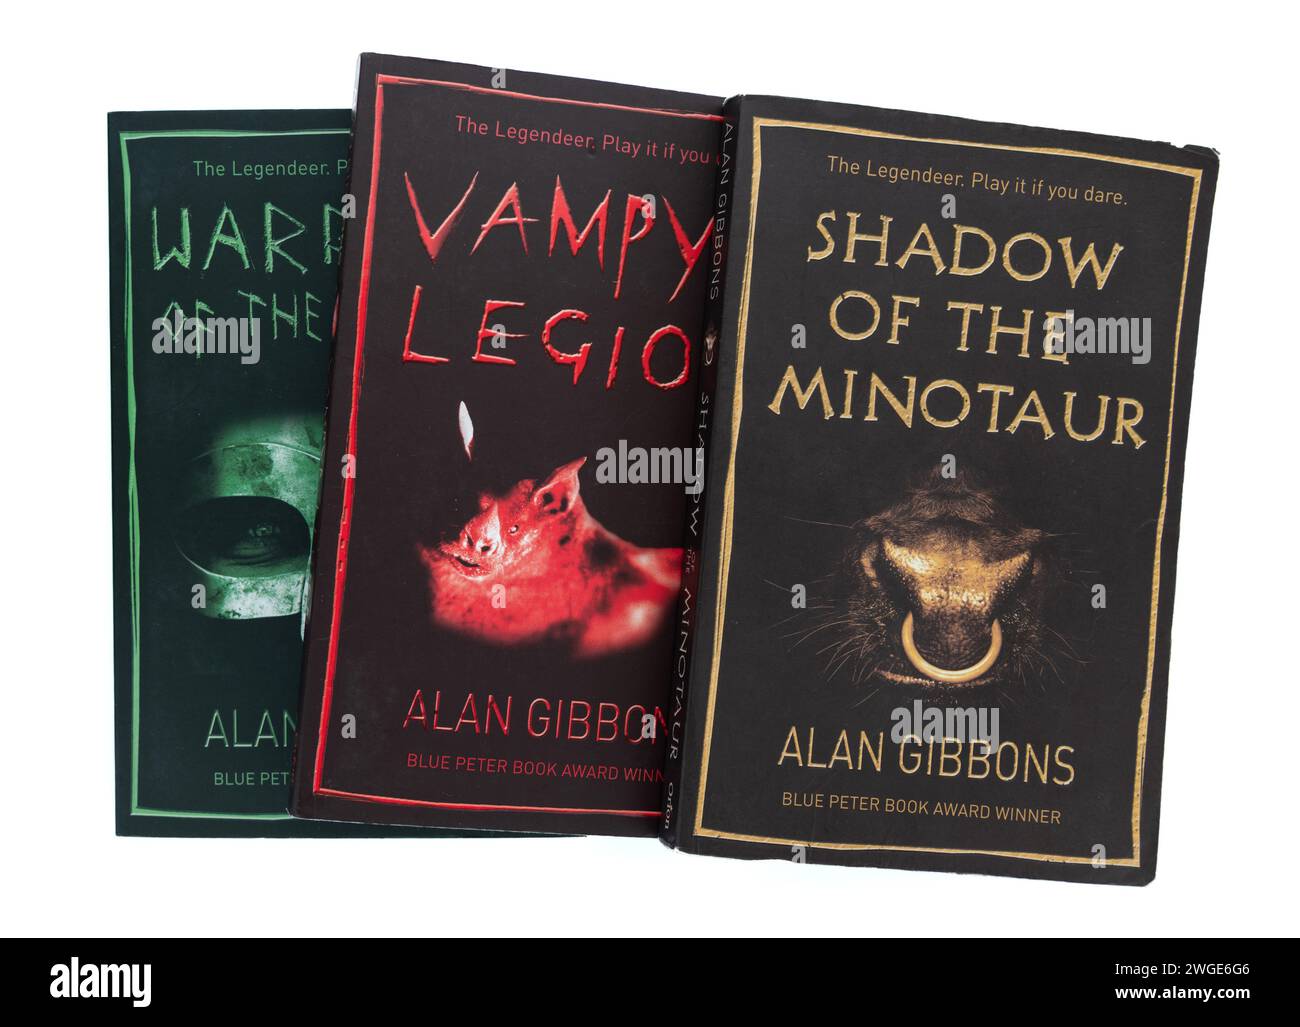 The Legendeer Trilogy - Shadow of the Minotaur, Vampyr Legion and Warriors of the Raven by Alan Gibbons Stock Photo